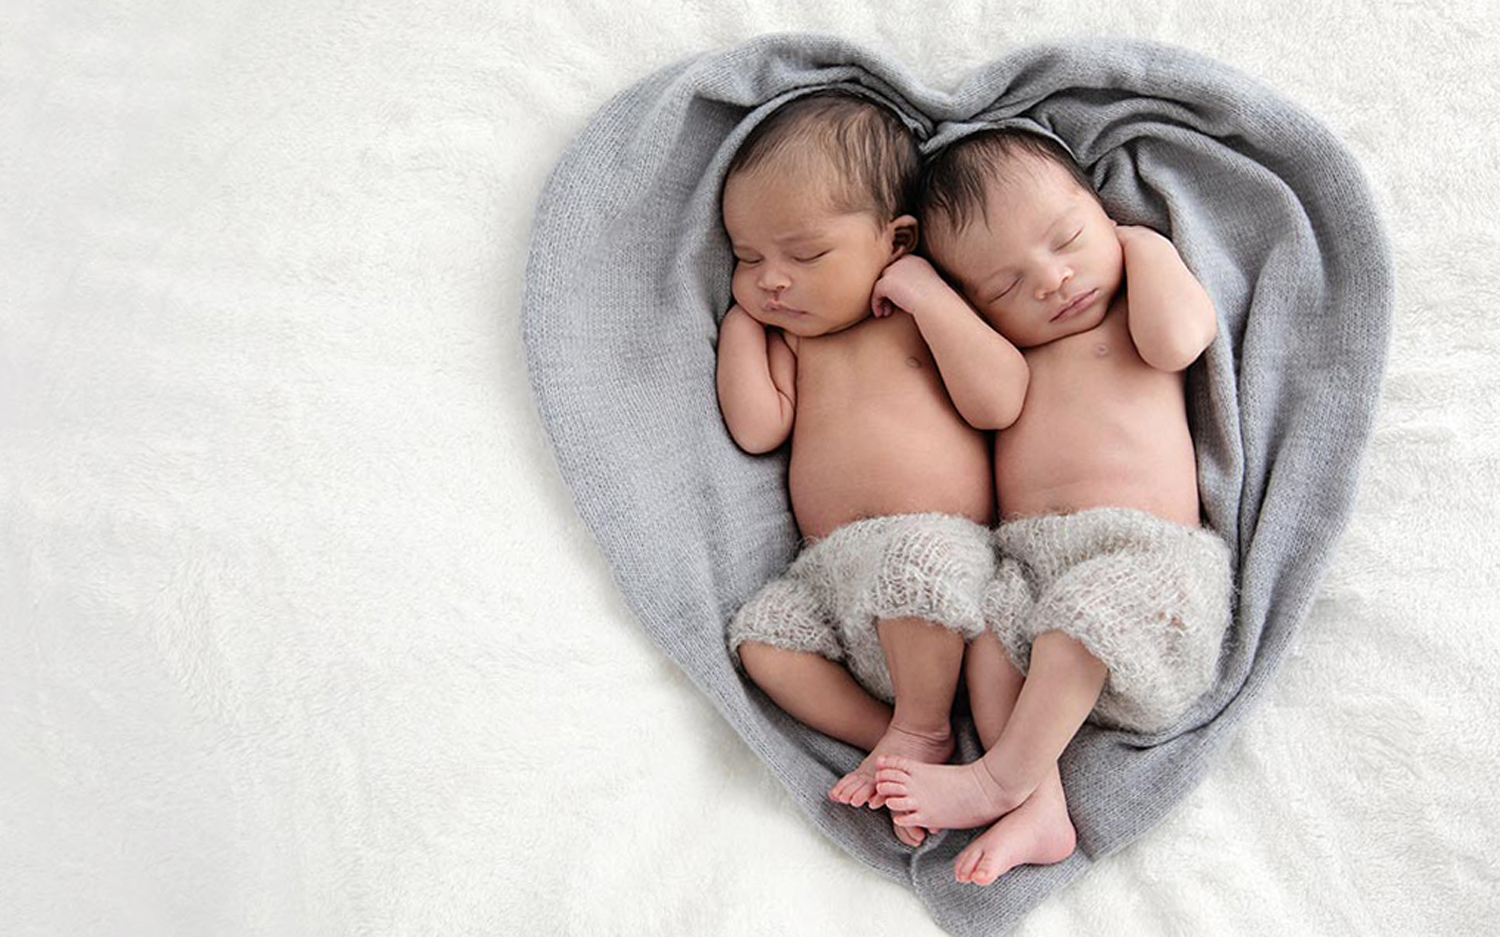 Two newborn babies cuddle on a heart-shaped gray fabric.